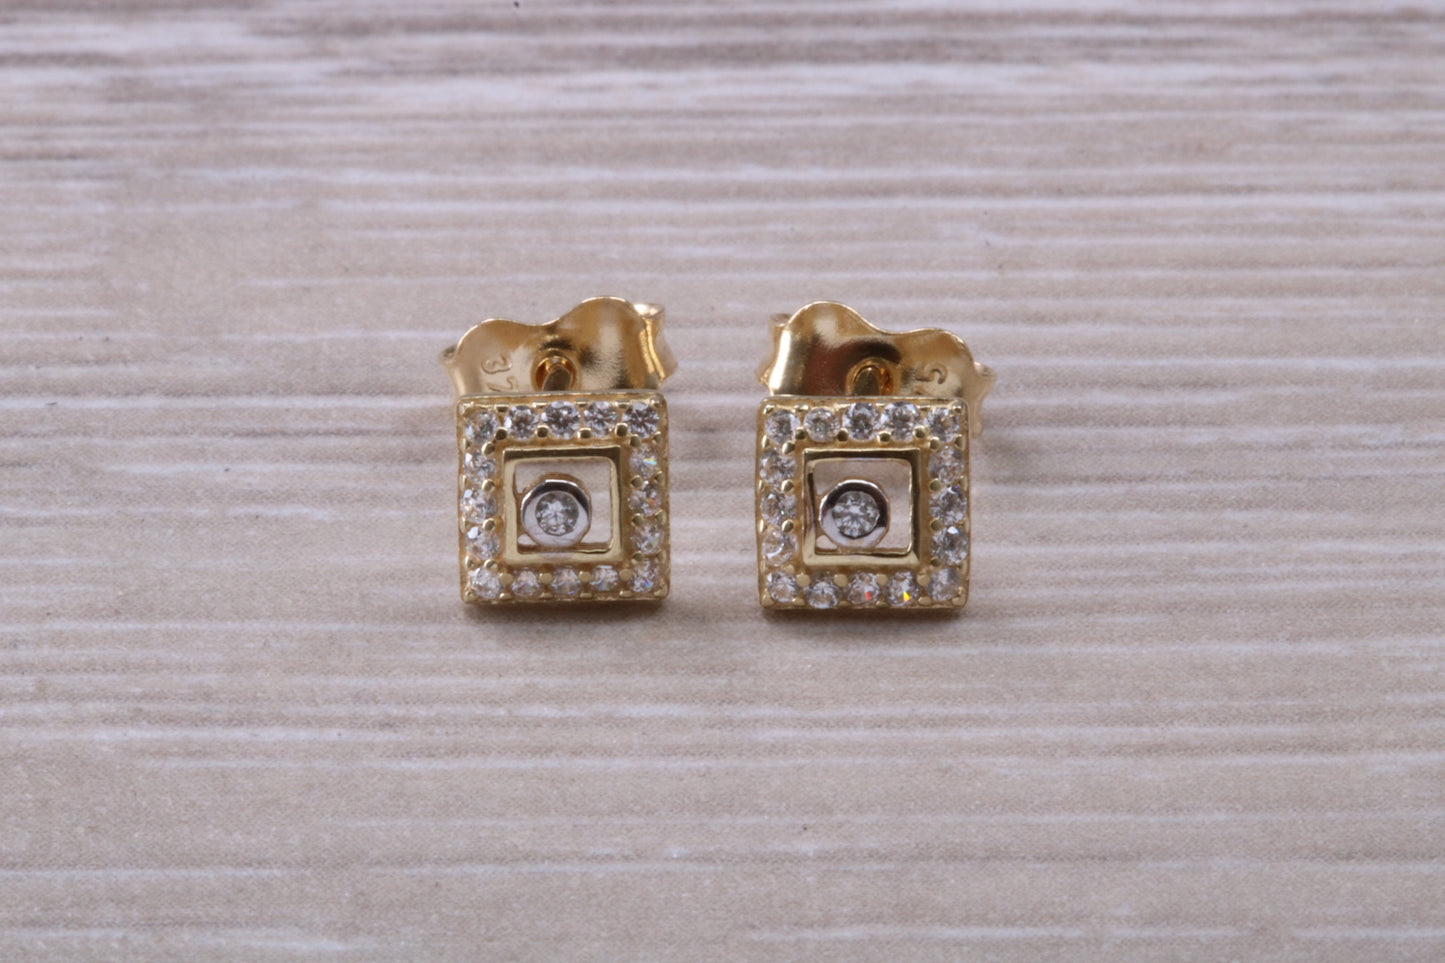 9ct yellow Gold Matching Stud Earrings, Necklace and Ring